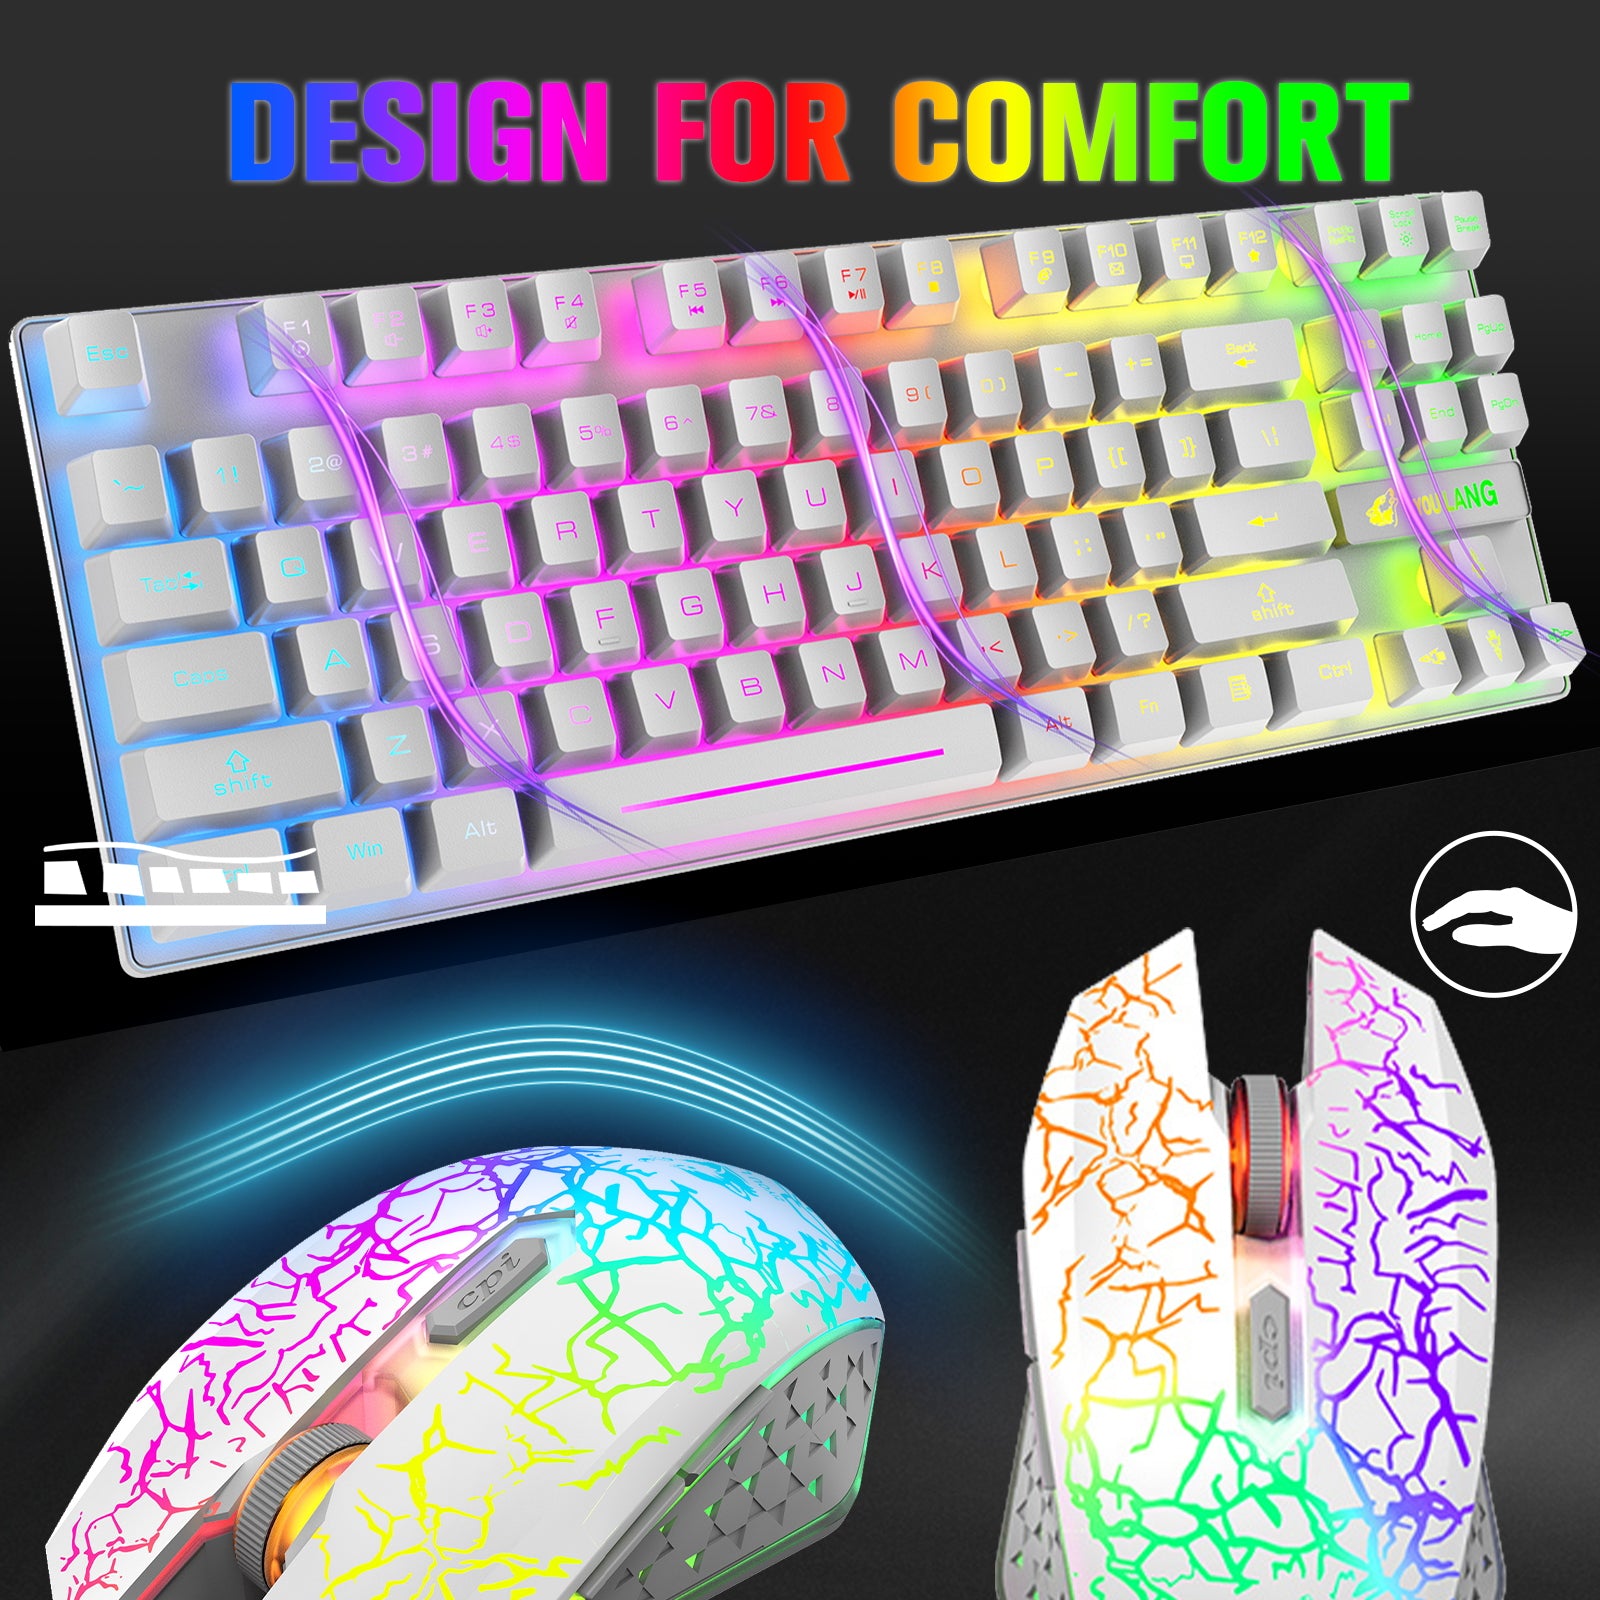 ZIYOU LANG T87 Wireless Gaming Keyboard and Mouse Combo with 87 Key Rainbow LED Backlight Rechargeable 3800mAh Battery Mechanical Feel Anti-ghosting Ergonomic Waterproof RGB Mute Mice for Computer PC Gamer (Black)